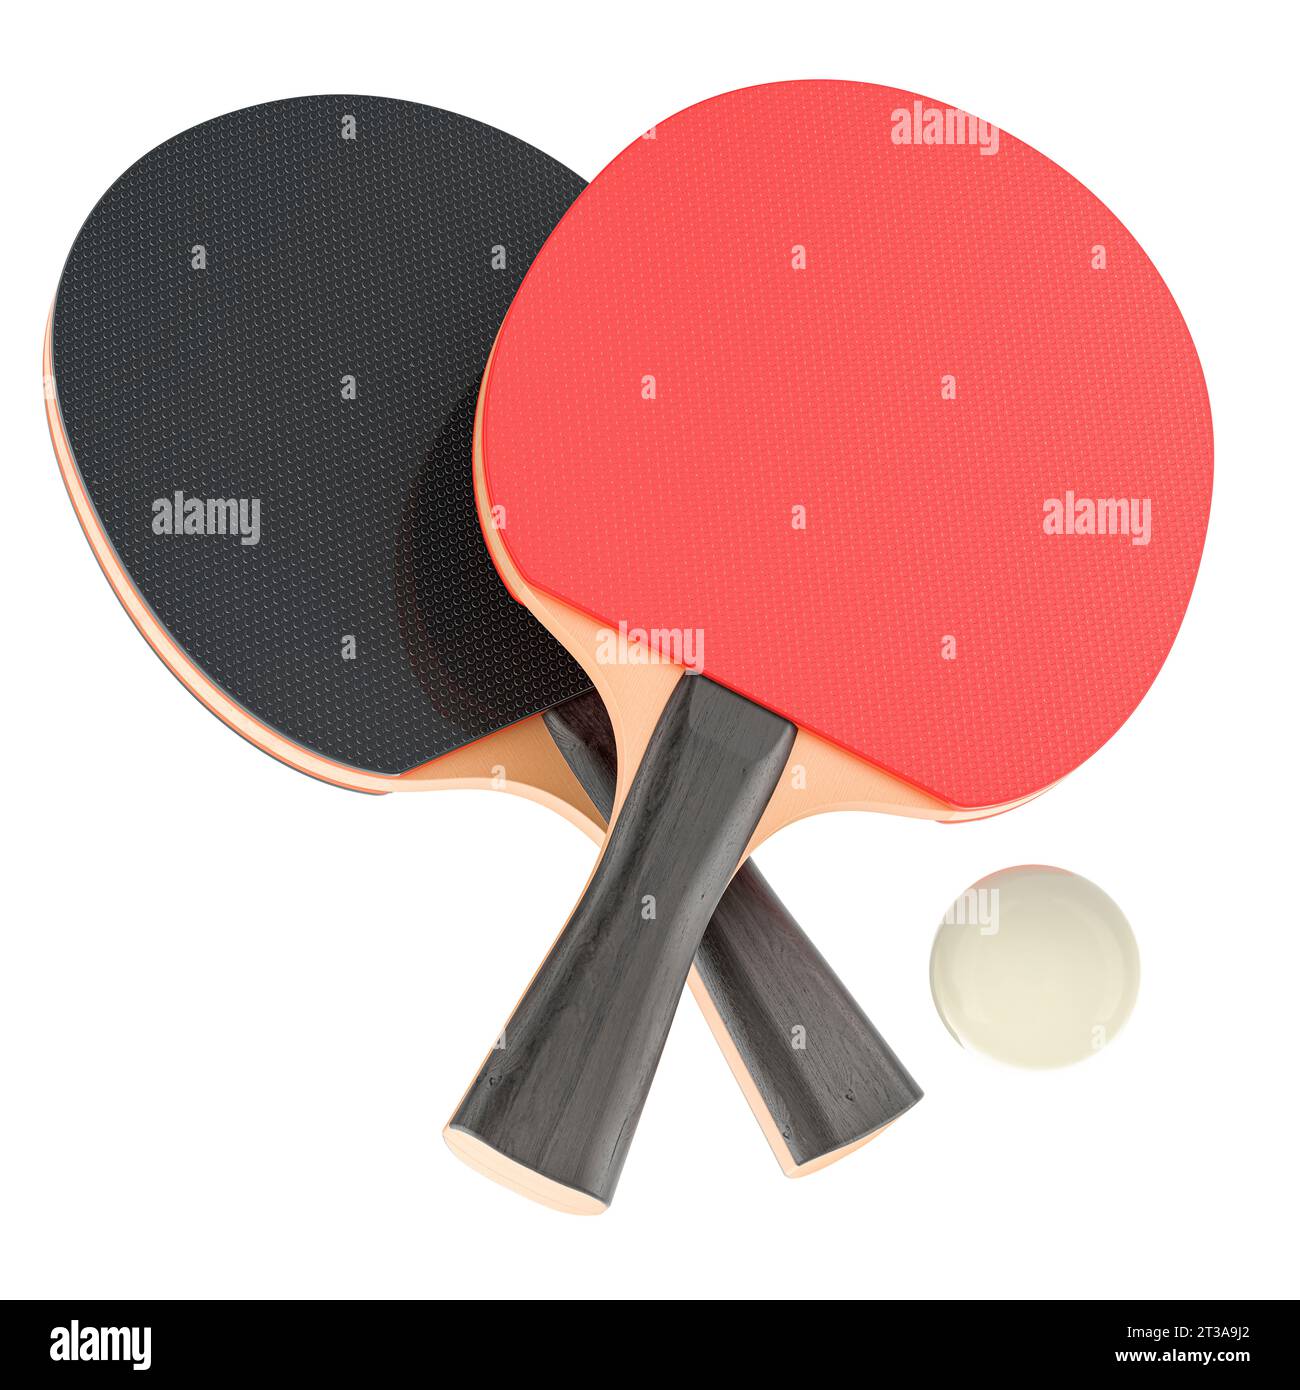 Table tennis equipment, ping pong rackets and ball. 3D rendering isolated on white background Stock Photo